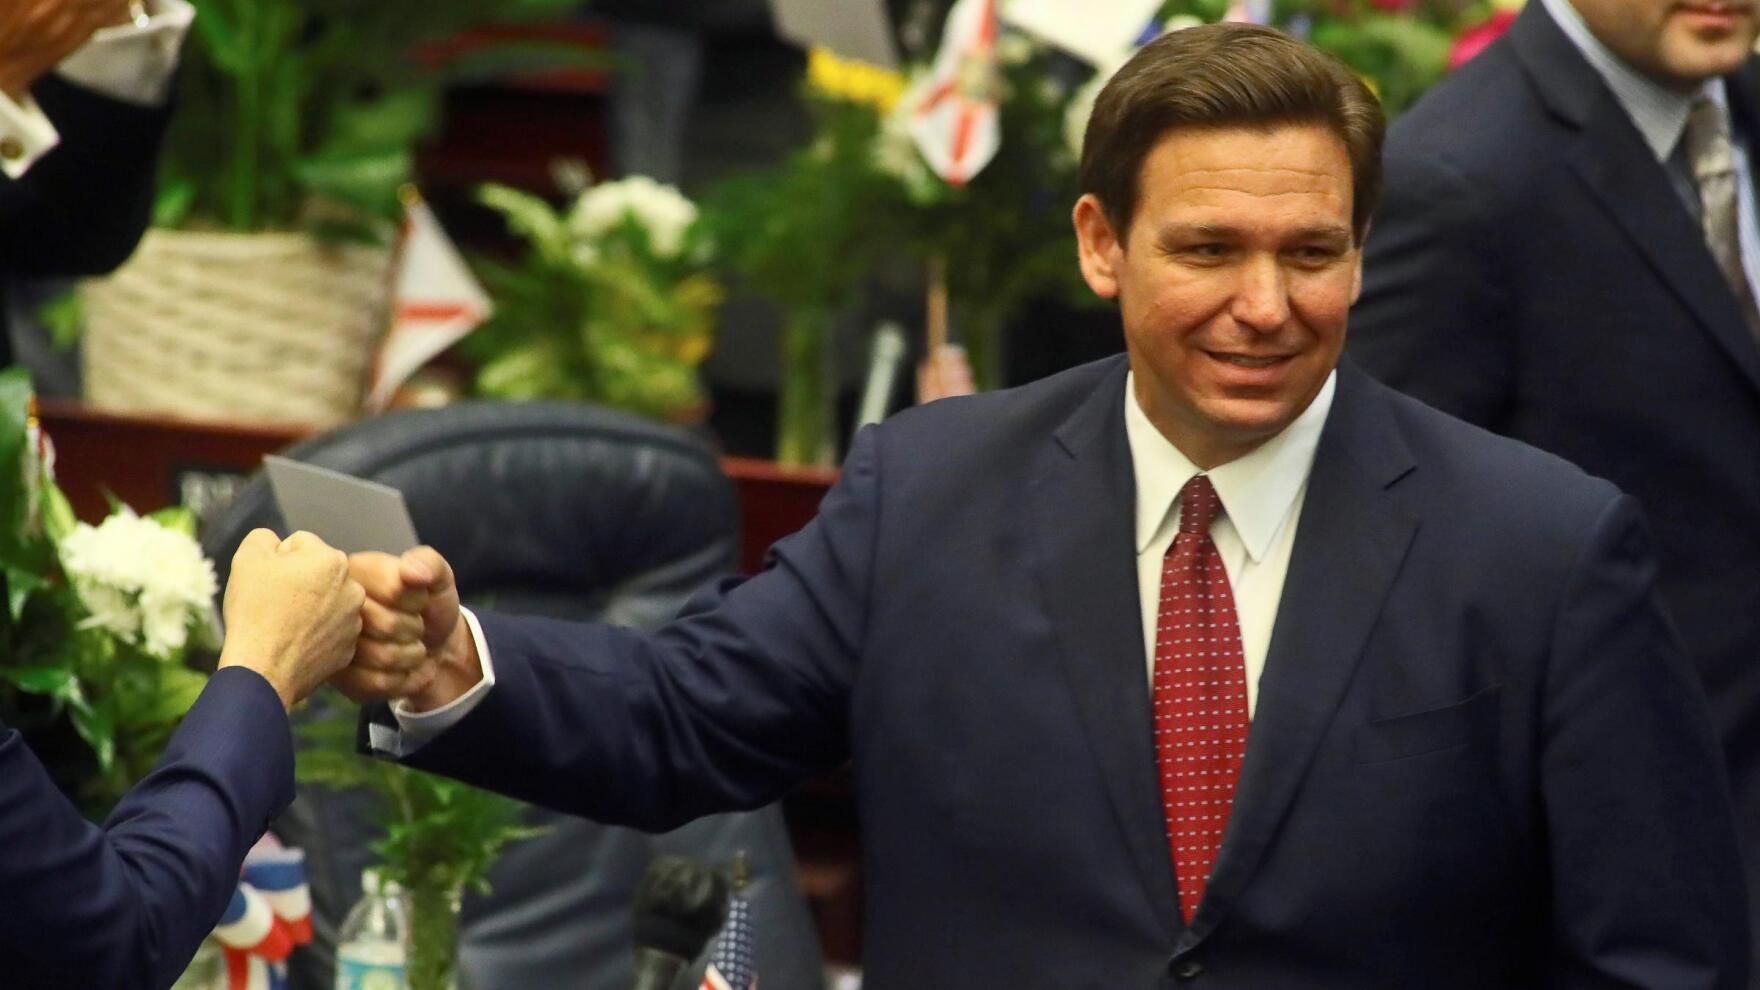 Featured image for “Opinion: Ron DeSantis doesn’t get Duval. Does he care?”